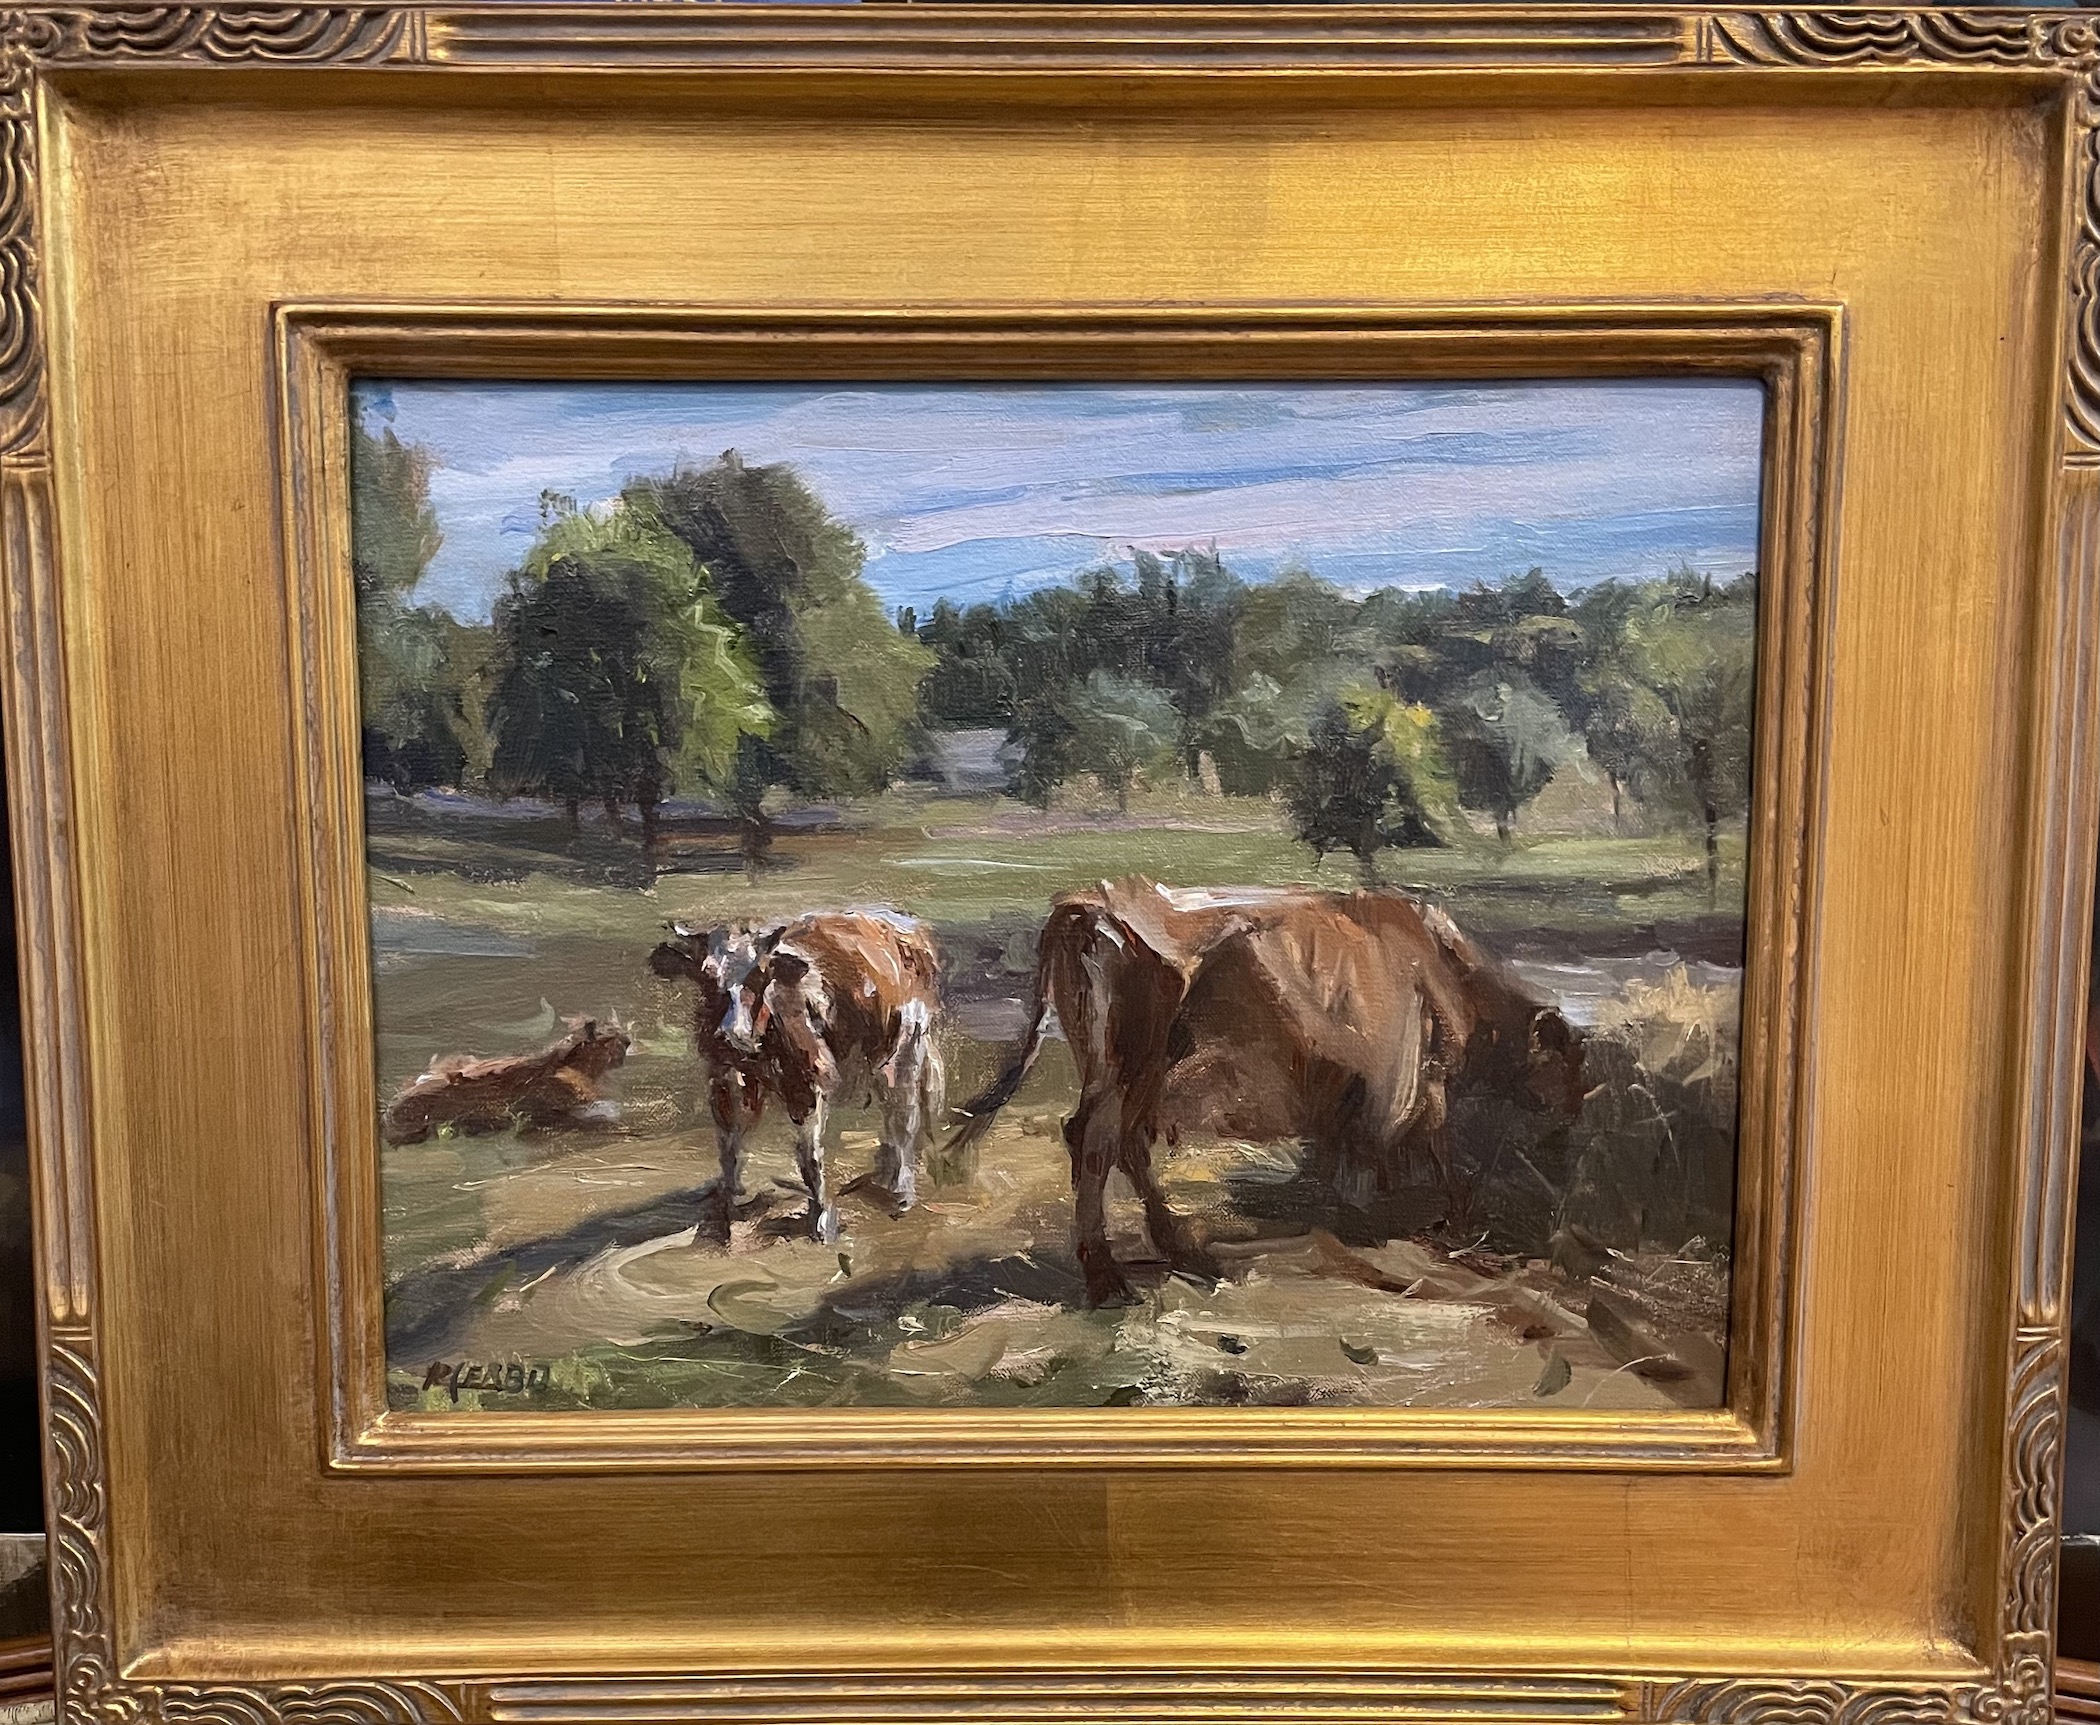 "Out to Pasture" in a golden frame with textured designs on the inner and outer edges and in the corners.